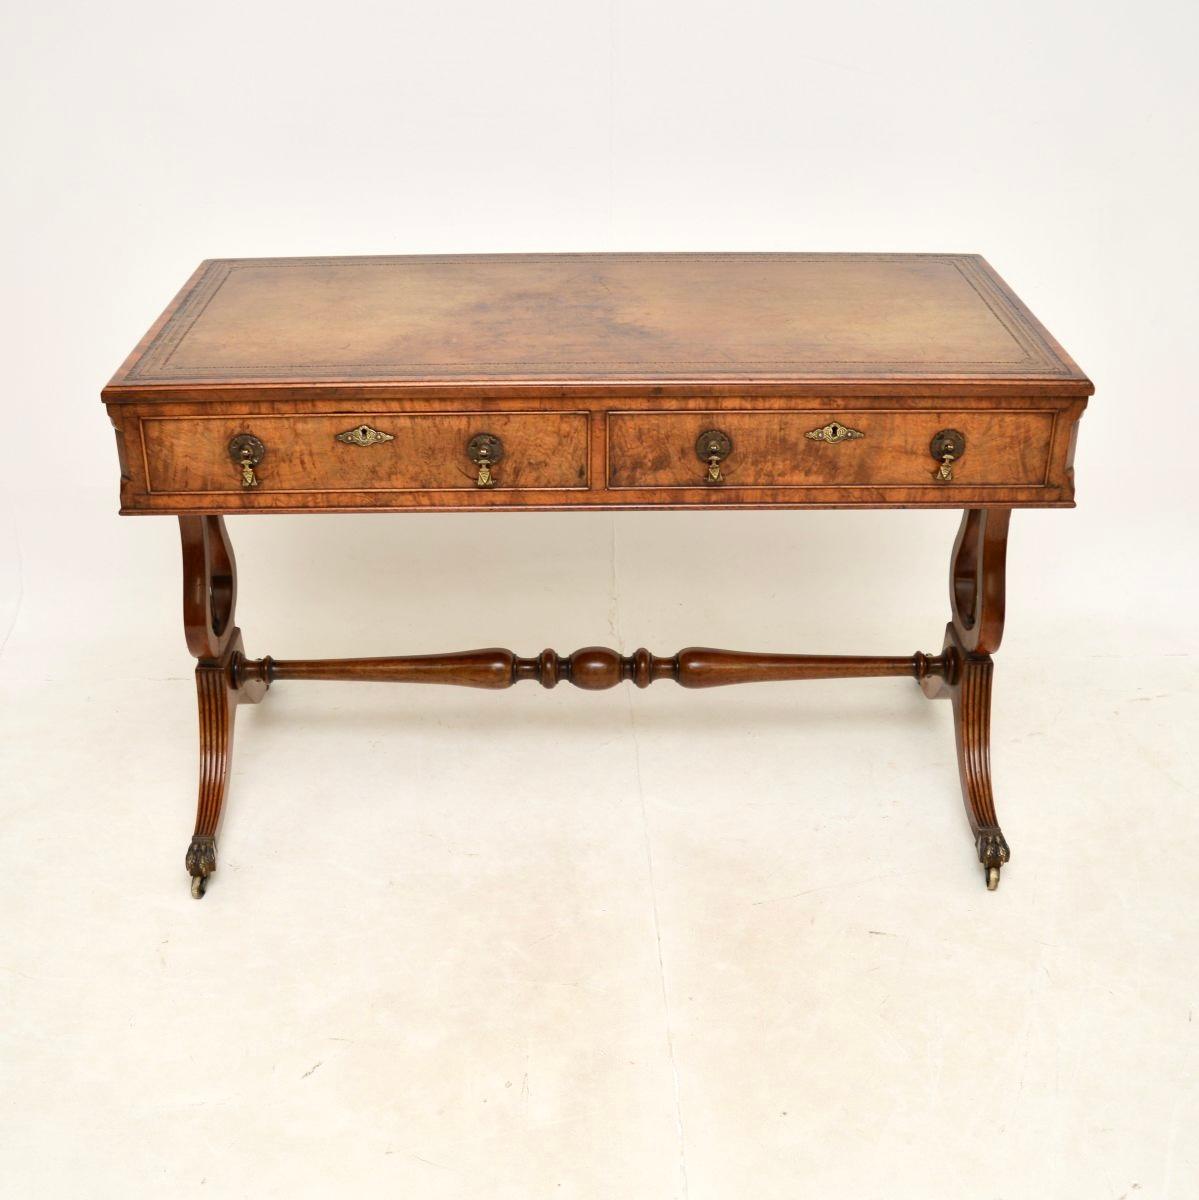 An outstanding antique figured walnut leather top writing desk. This was made in England, it dates from the 1890-1900 period.

It is of superb quality, there are stunning burr walnut grain patterns, this stands on a stretchered base with harp shaped